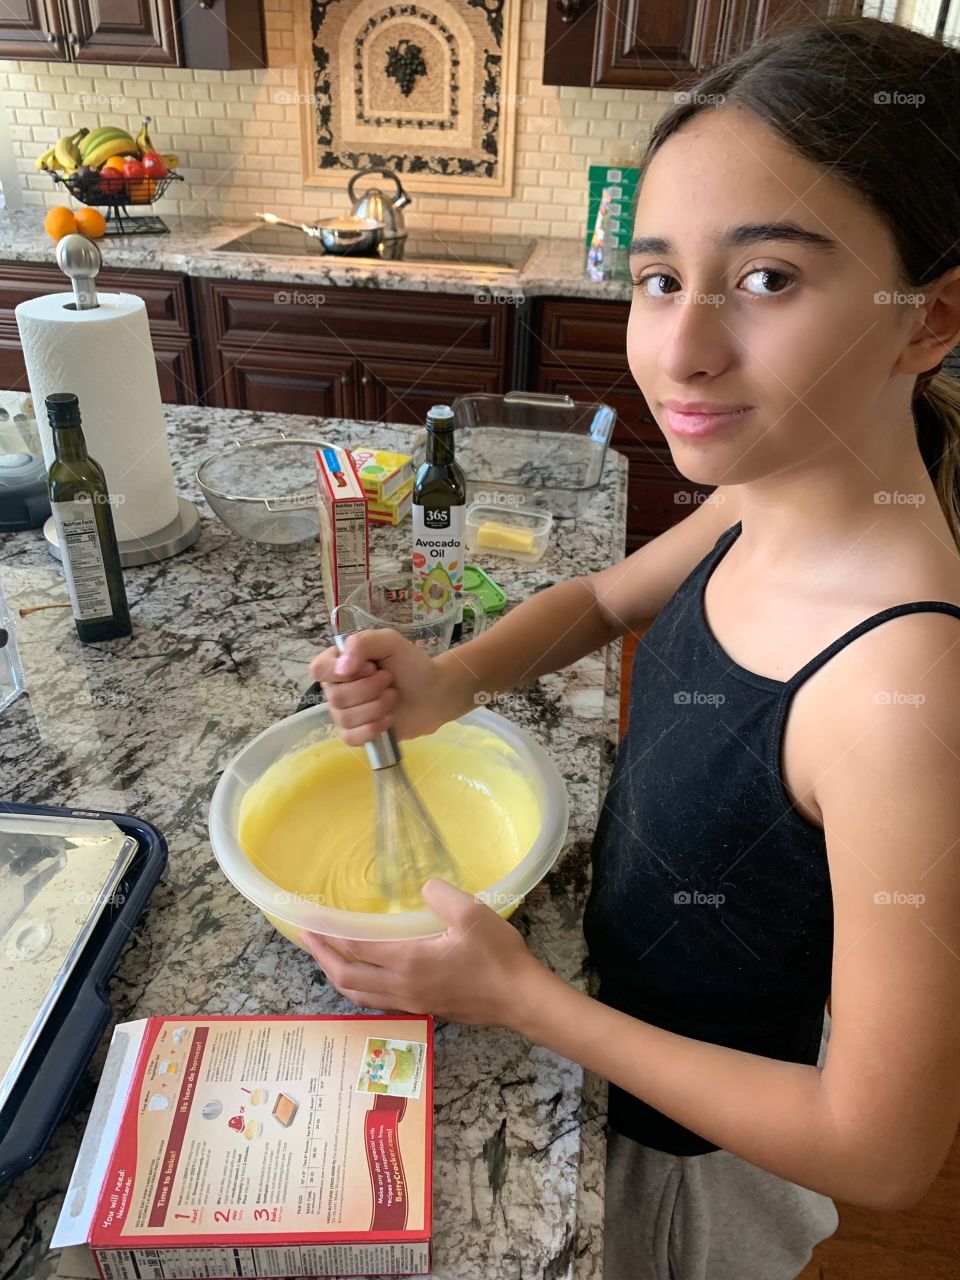 My 11 we are all helping me make our first lemon, strawberry, Jell-O mousse and Jell-O cake. It was very delicious